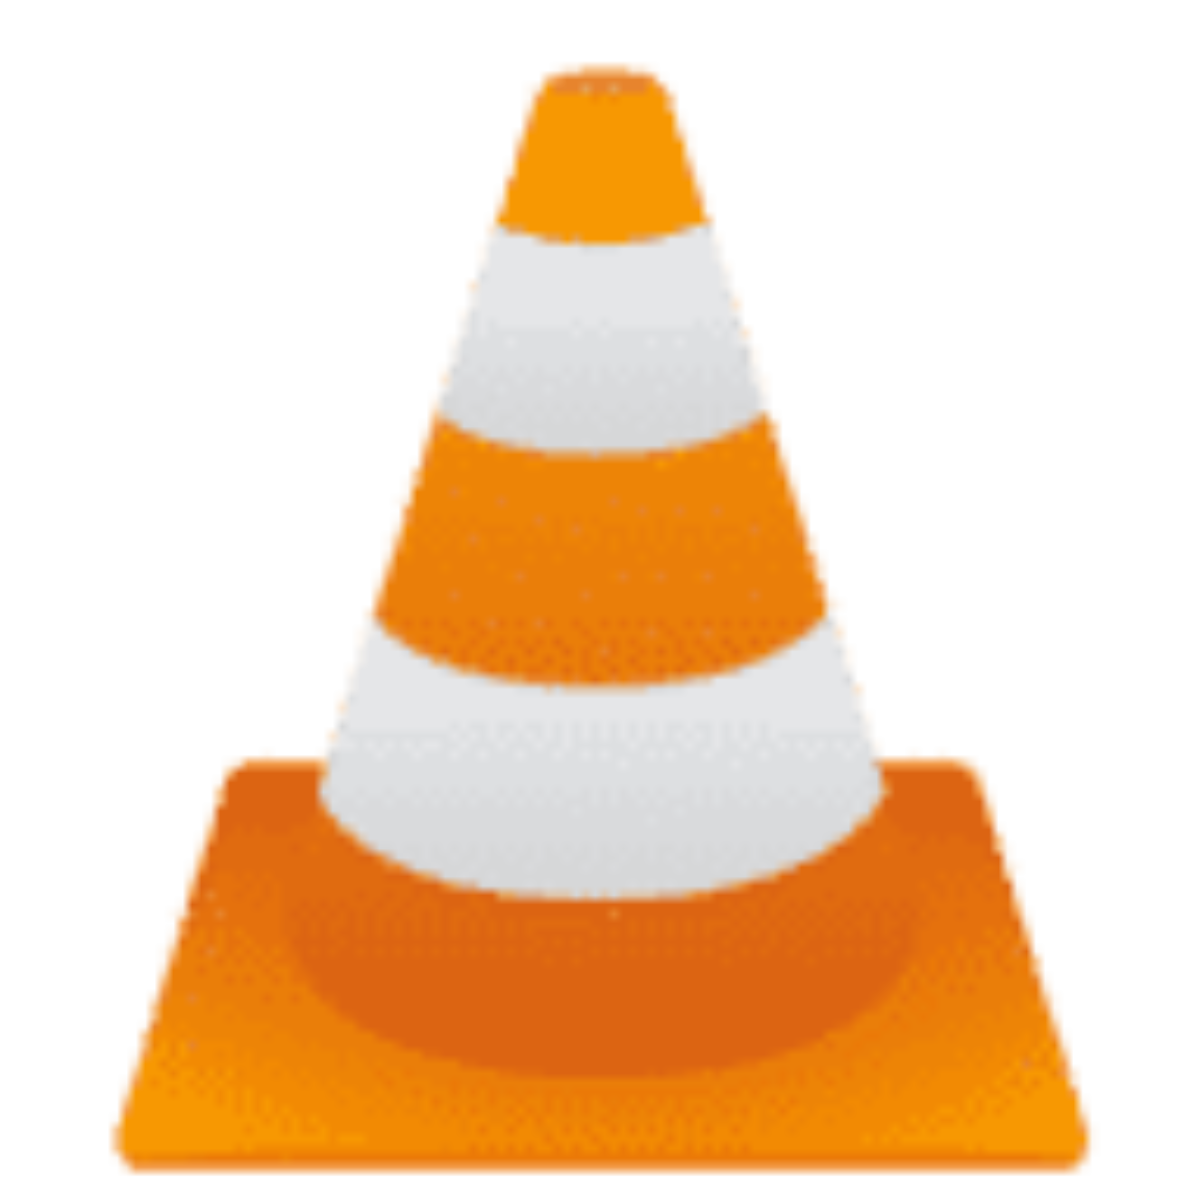 download and install vlc media player for mac